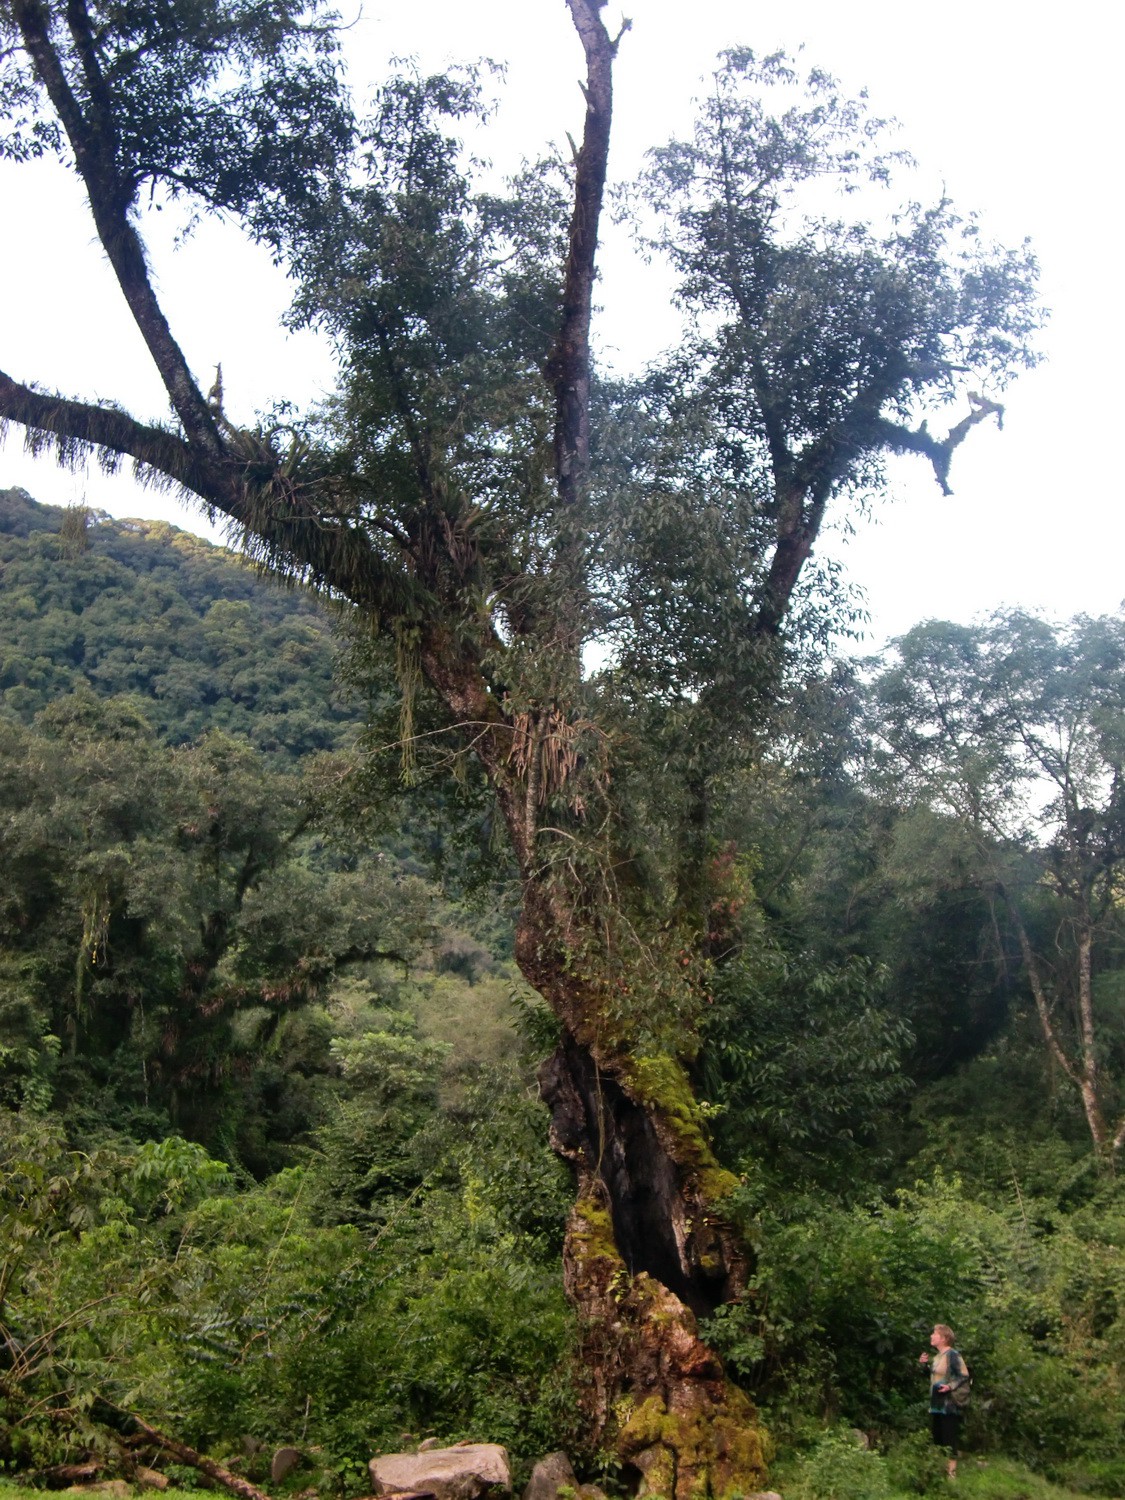 Moss-covered tree on the Ruta 9